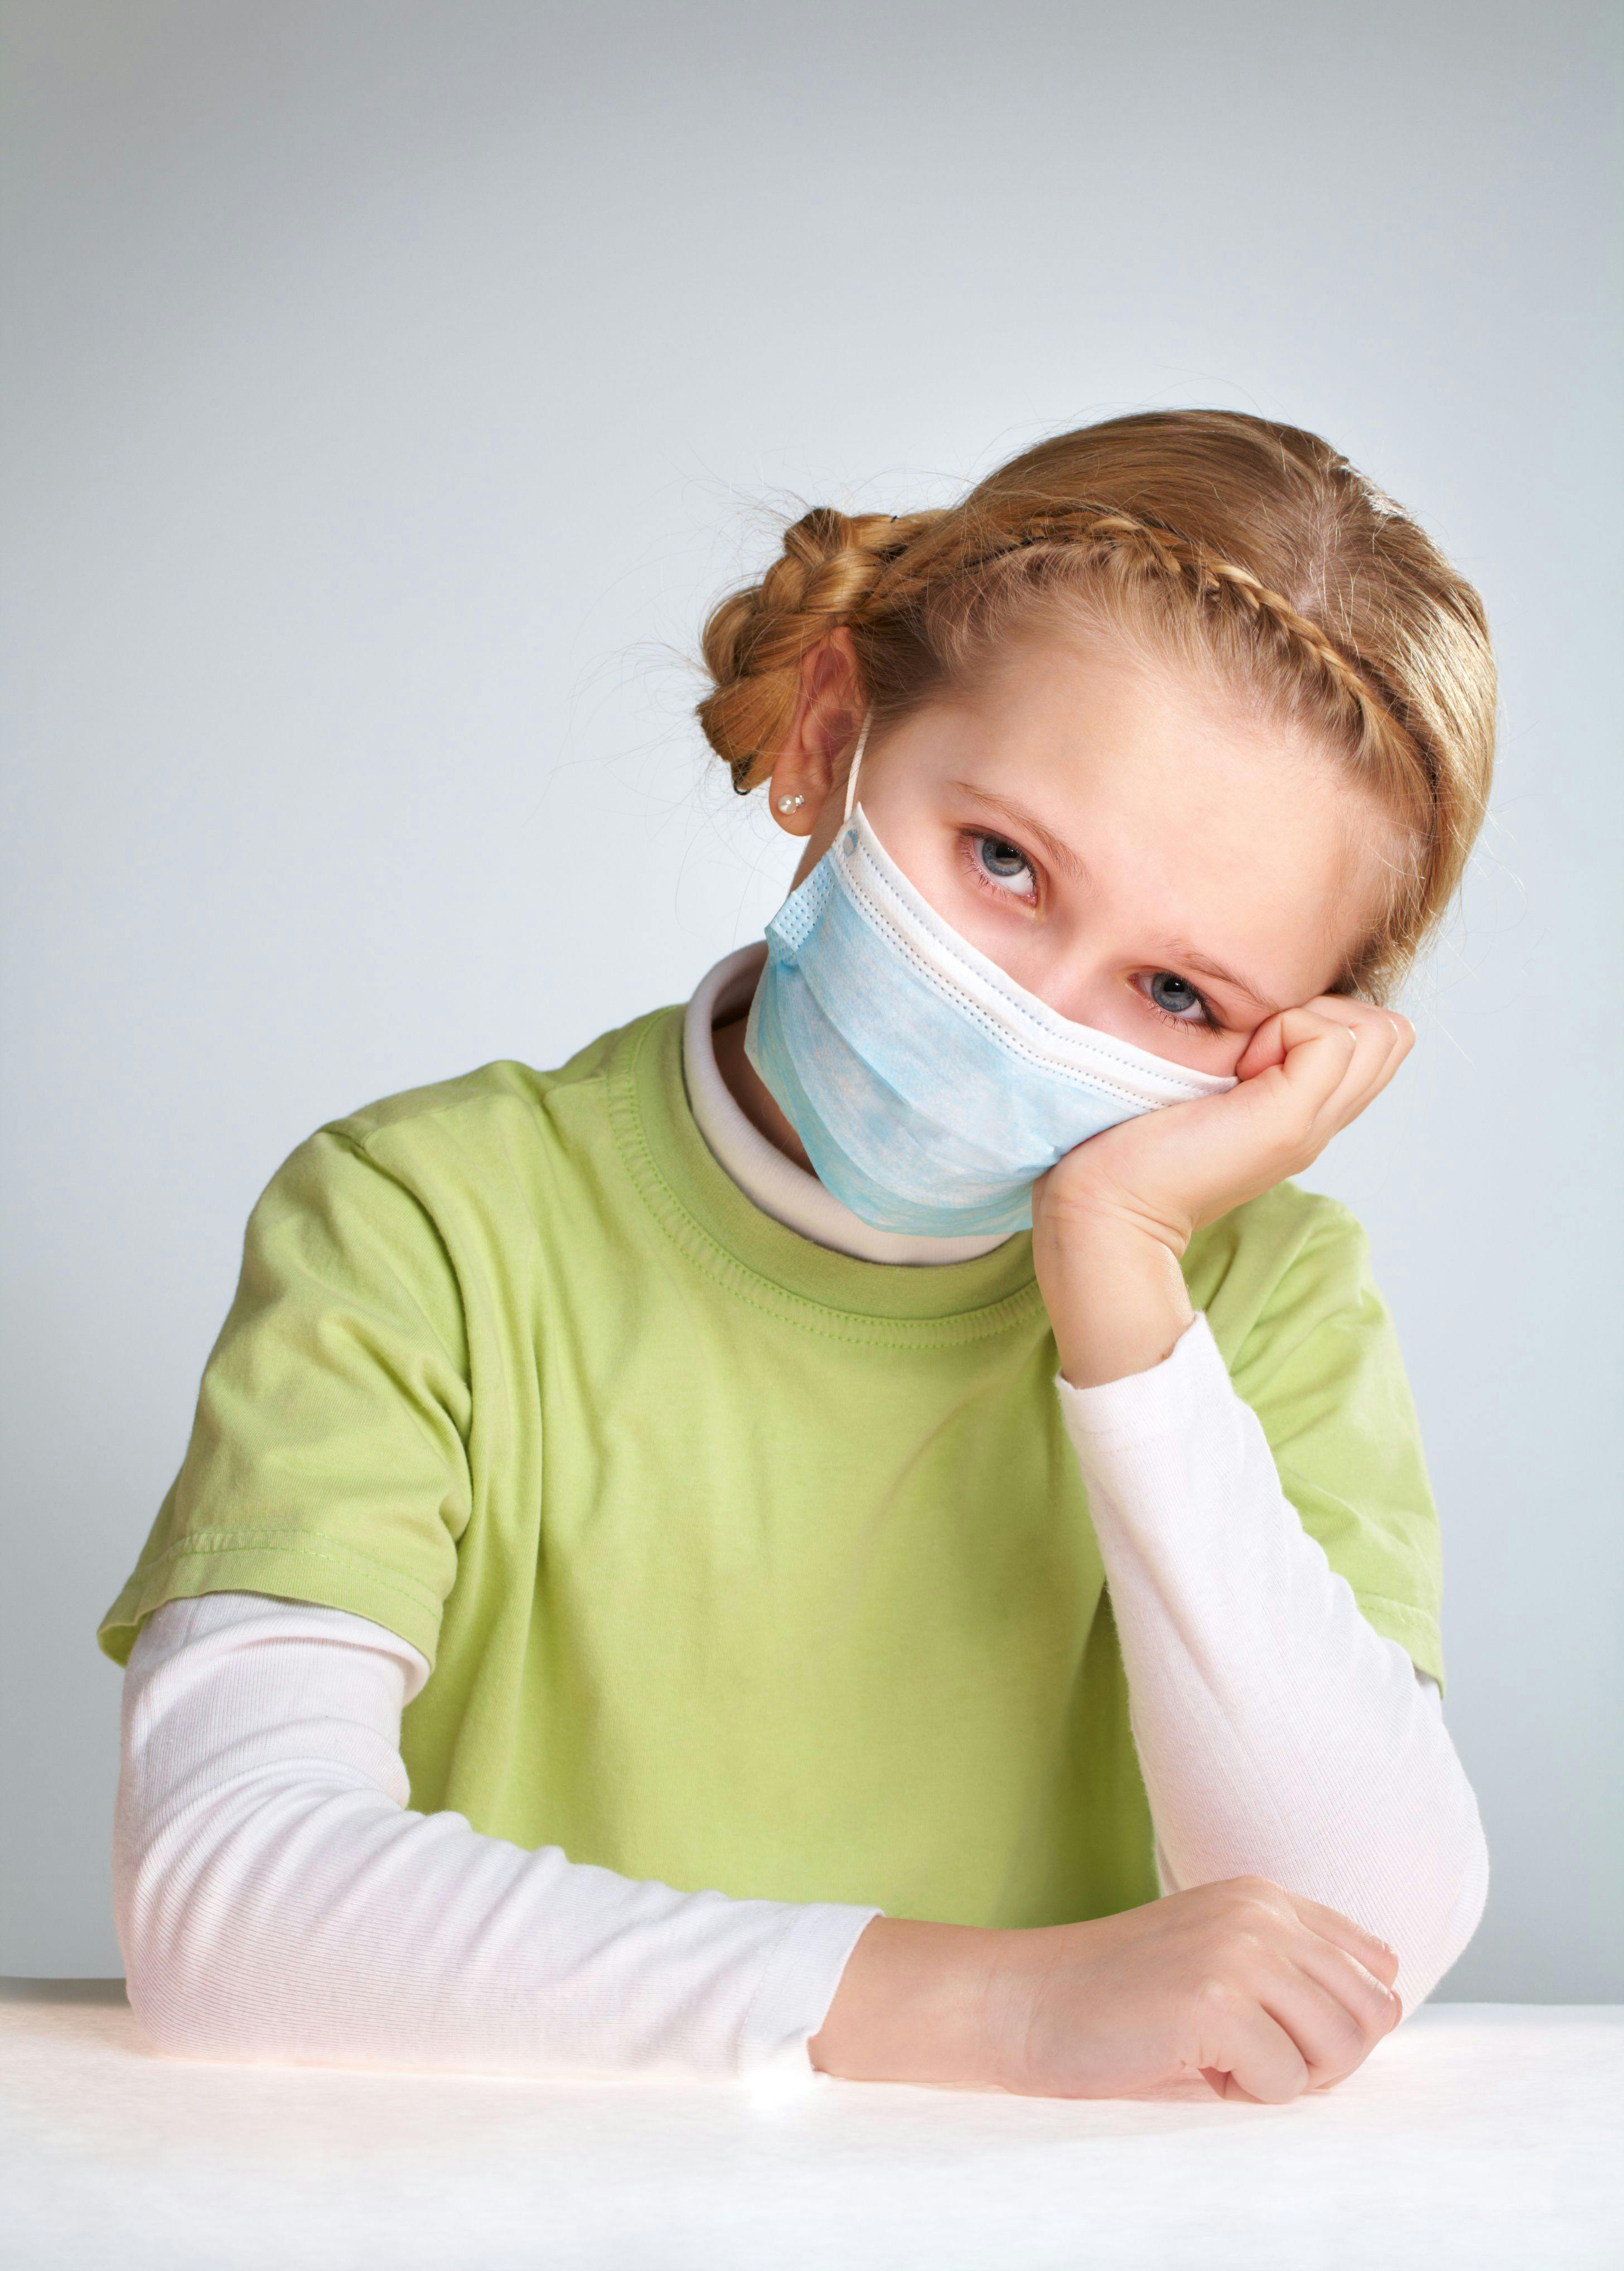 TB in pediatric patients is not so wee